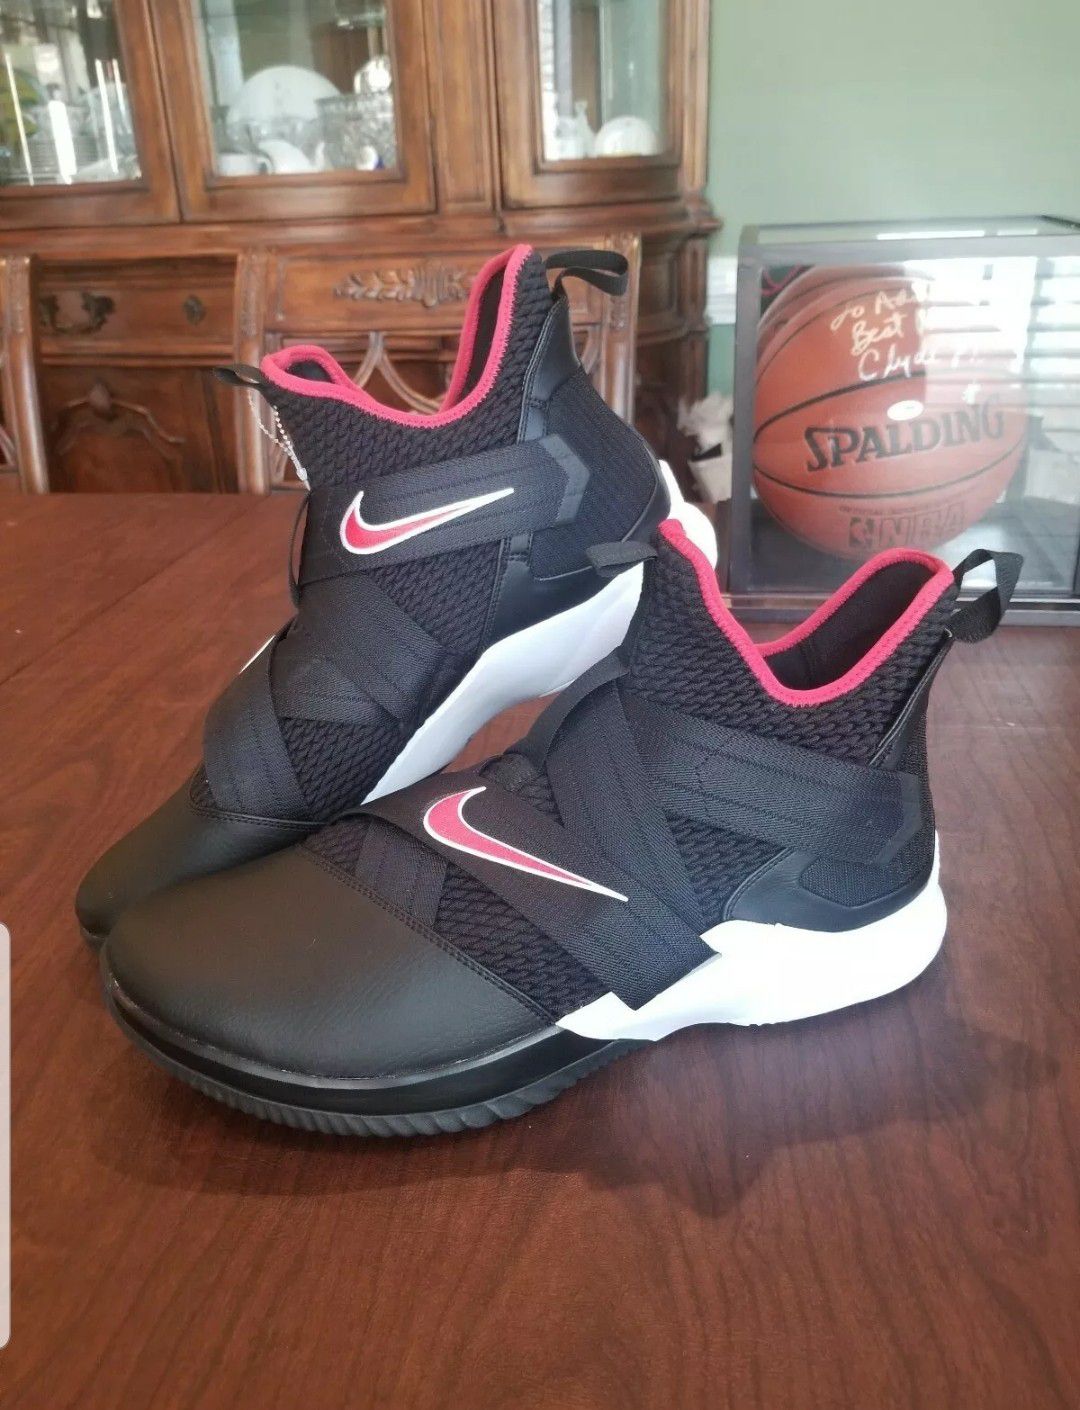 BRAND NEW Nike Lebron Soldier 12 Bred Mens AO2609-001 Black Red Basketball Shoes Size 18